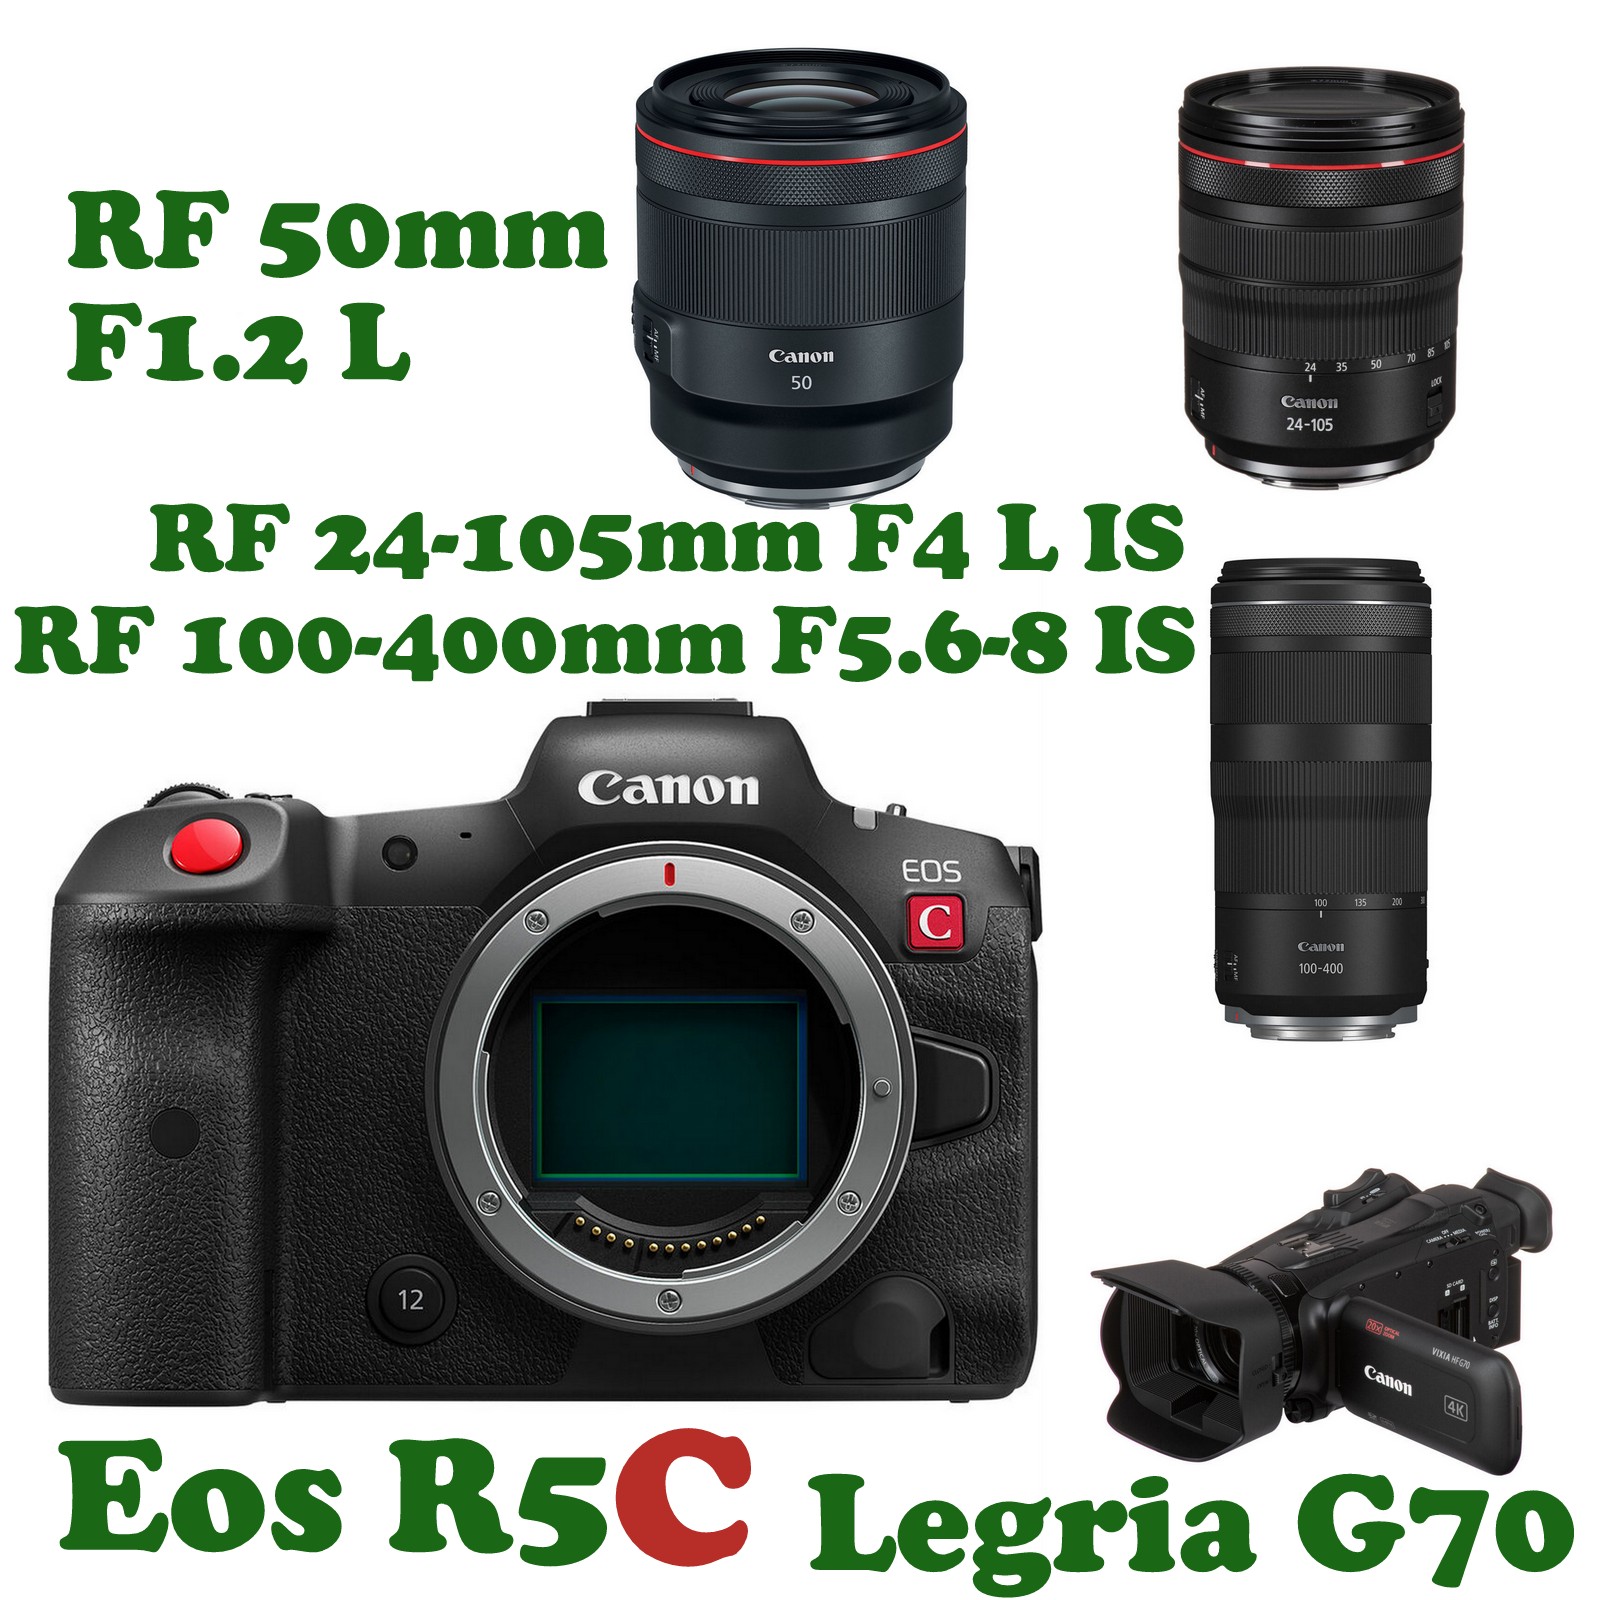 Now available at FFcamera Lens Rental Canon R5C RF 50mm F1.2 L USM RF 24-105mm F4 L IS USM RF 100-400mm F5.6-8 IS USM Legria HF G70 Camcorder 013-500 4477